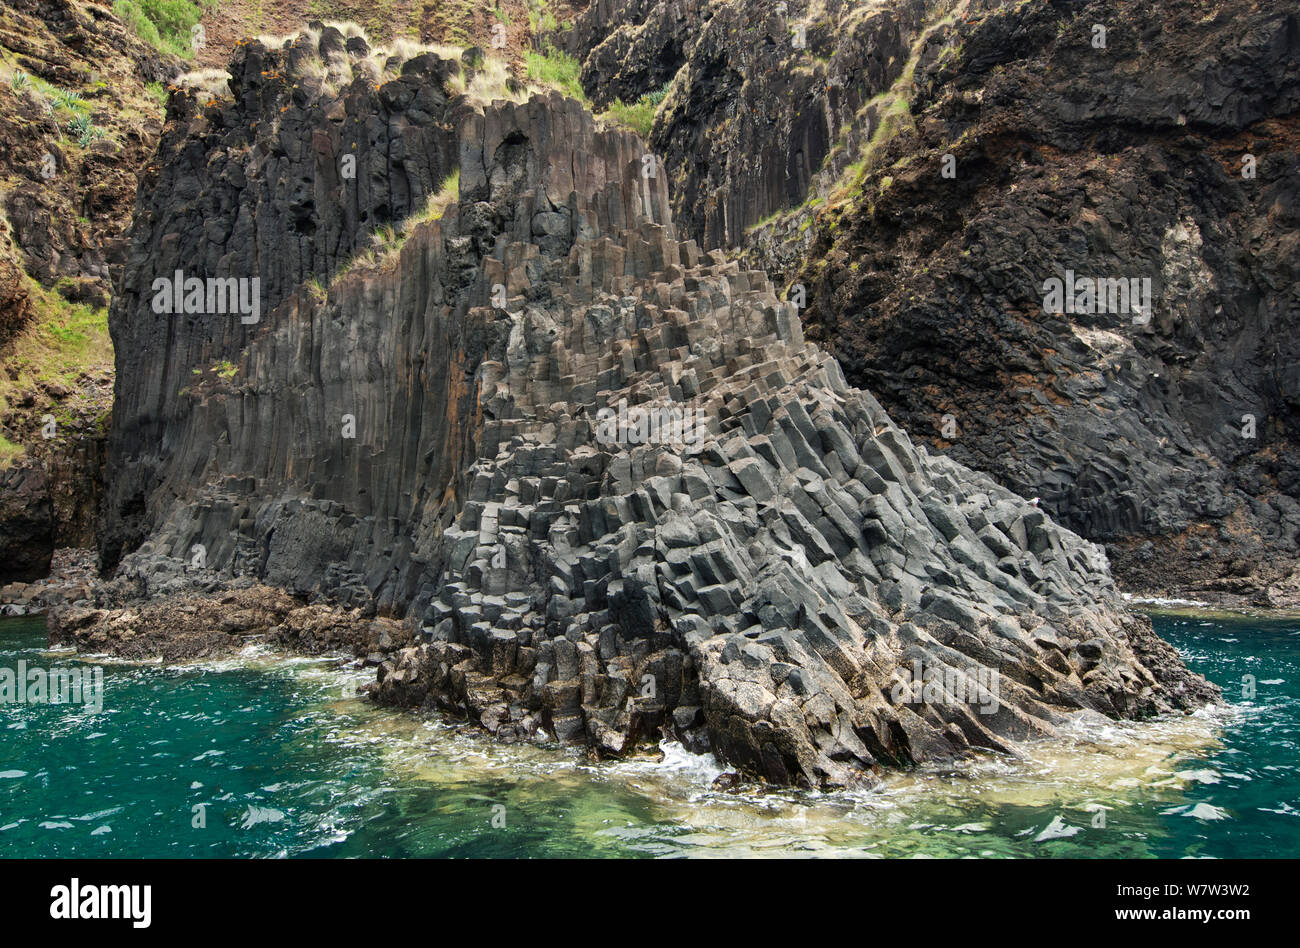 Volcanic cliffs, south of Santa Maria island, Azores, Portugal, July 2012. Stock Photo